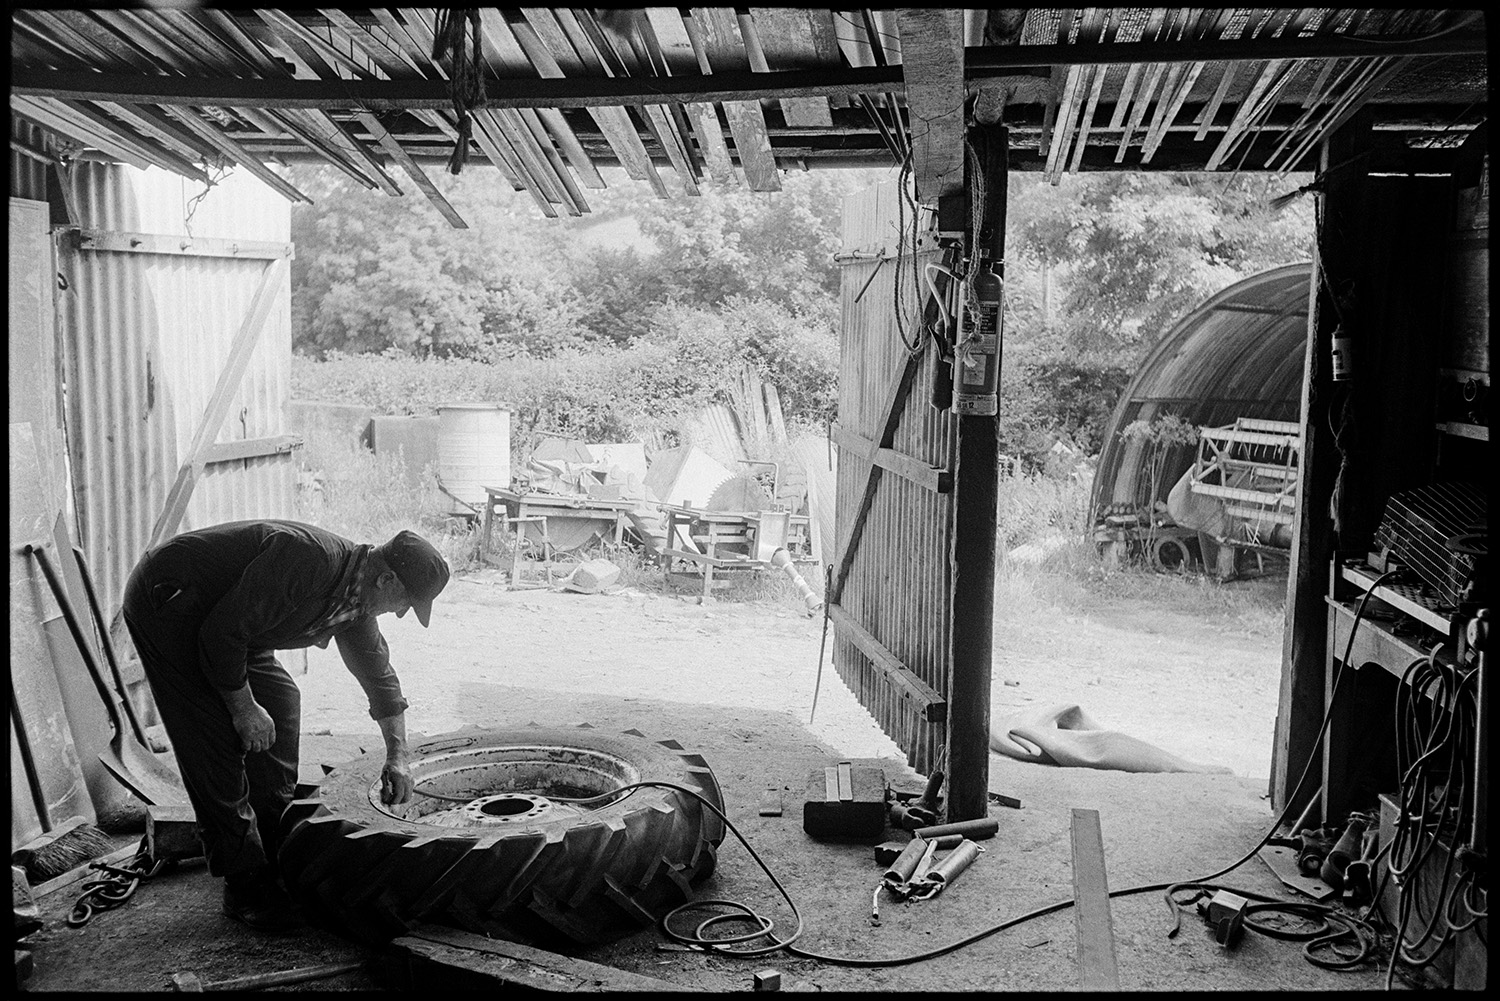 Agricultural engineers workshop, mending puncture, tractors, combine harvester. 
[A man mending a puncture in a tractor tyre in a corrugated iron shed at an agricultural engineer's workshop at Hollocombe.]